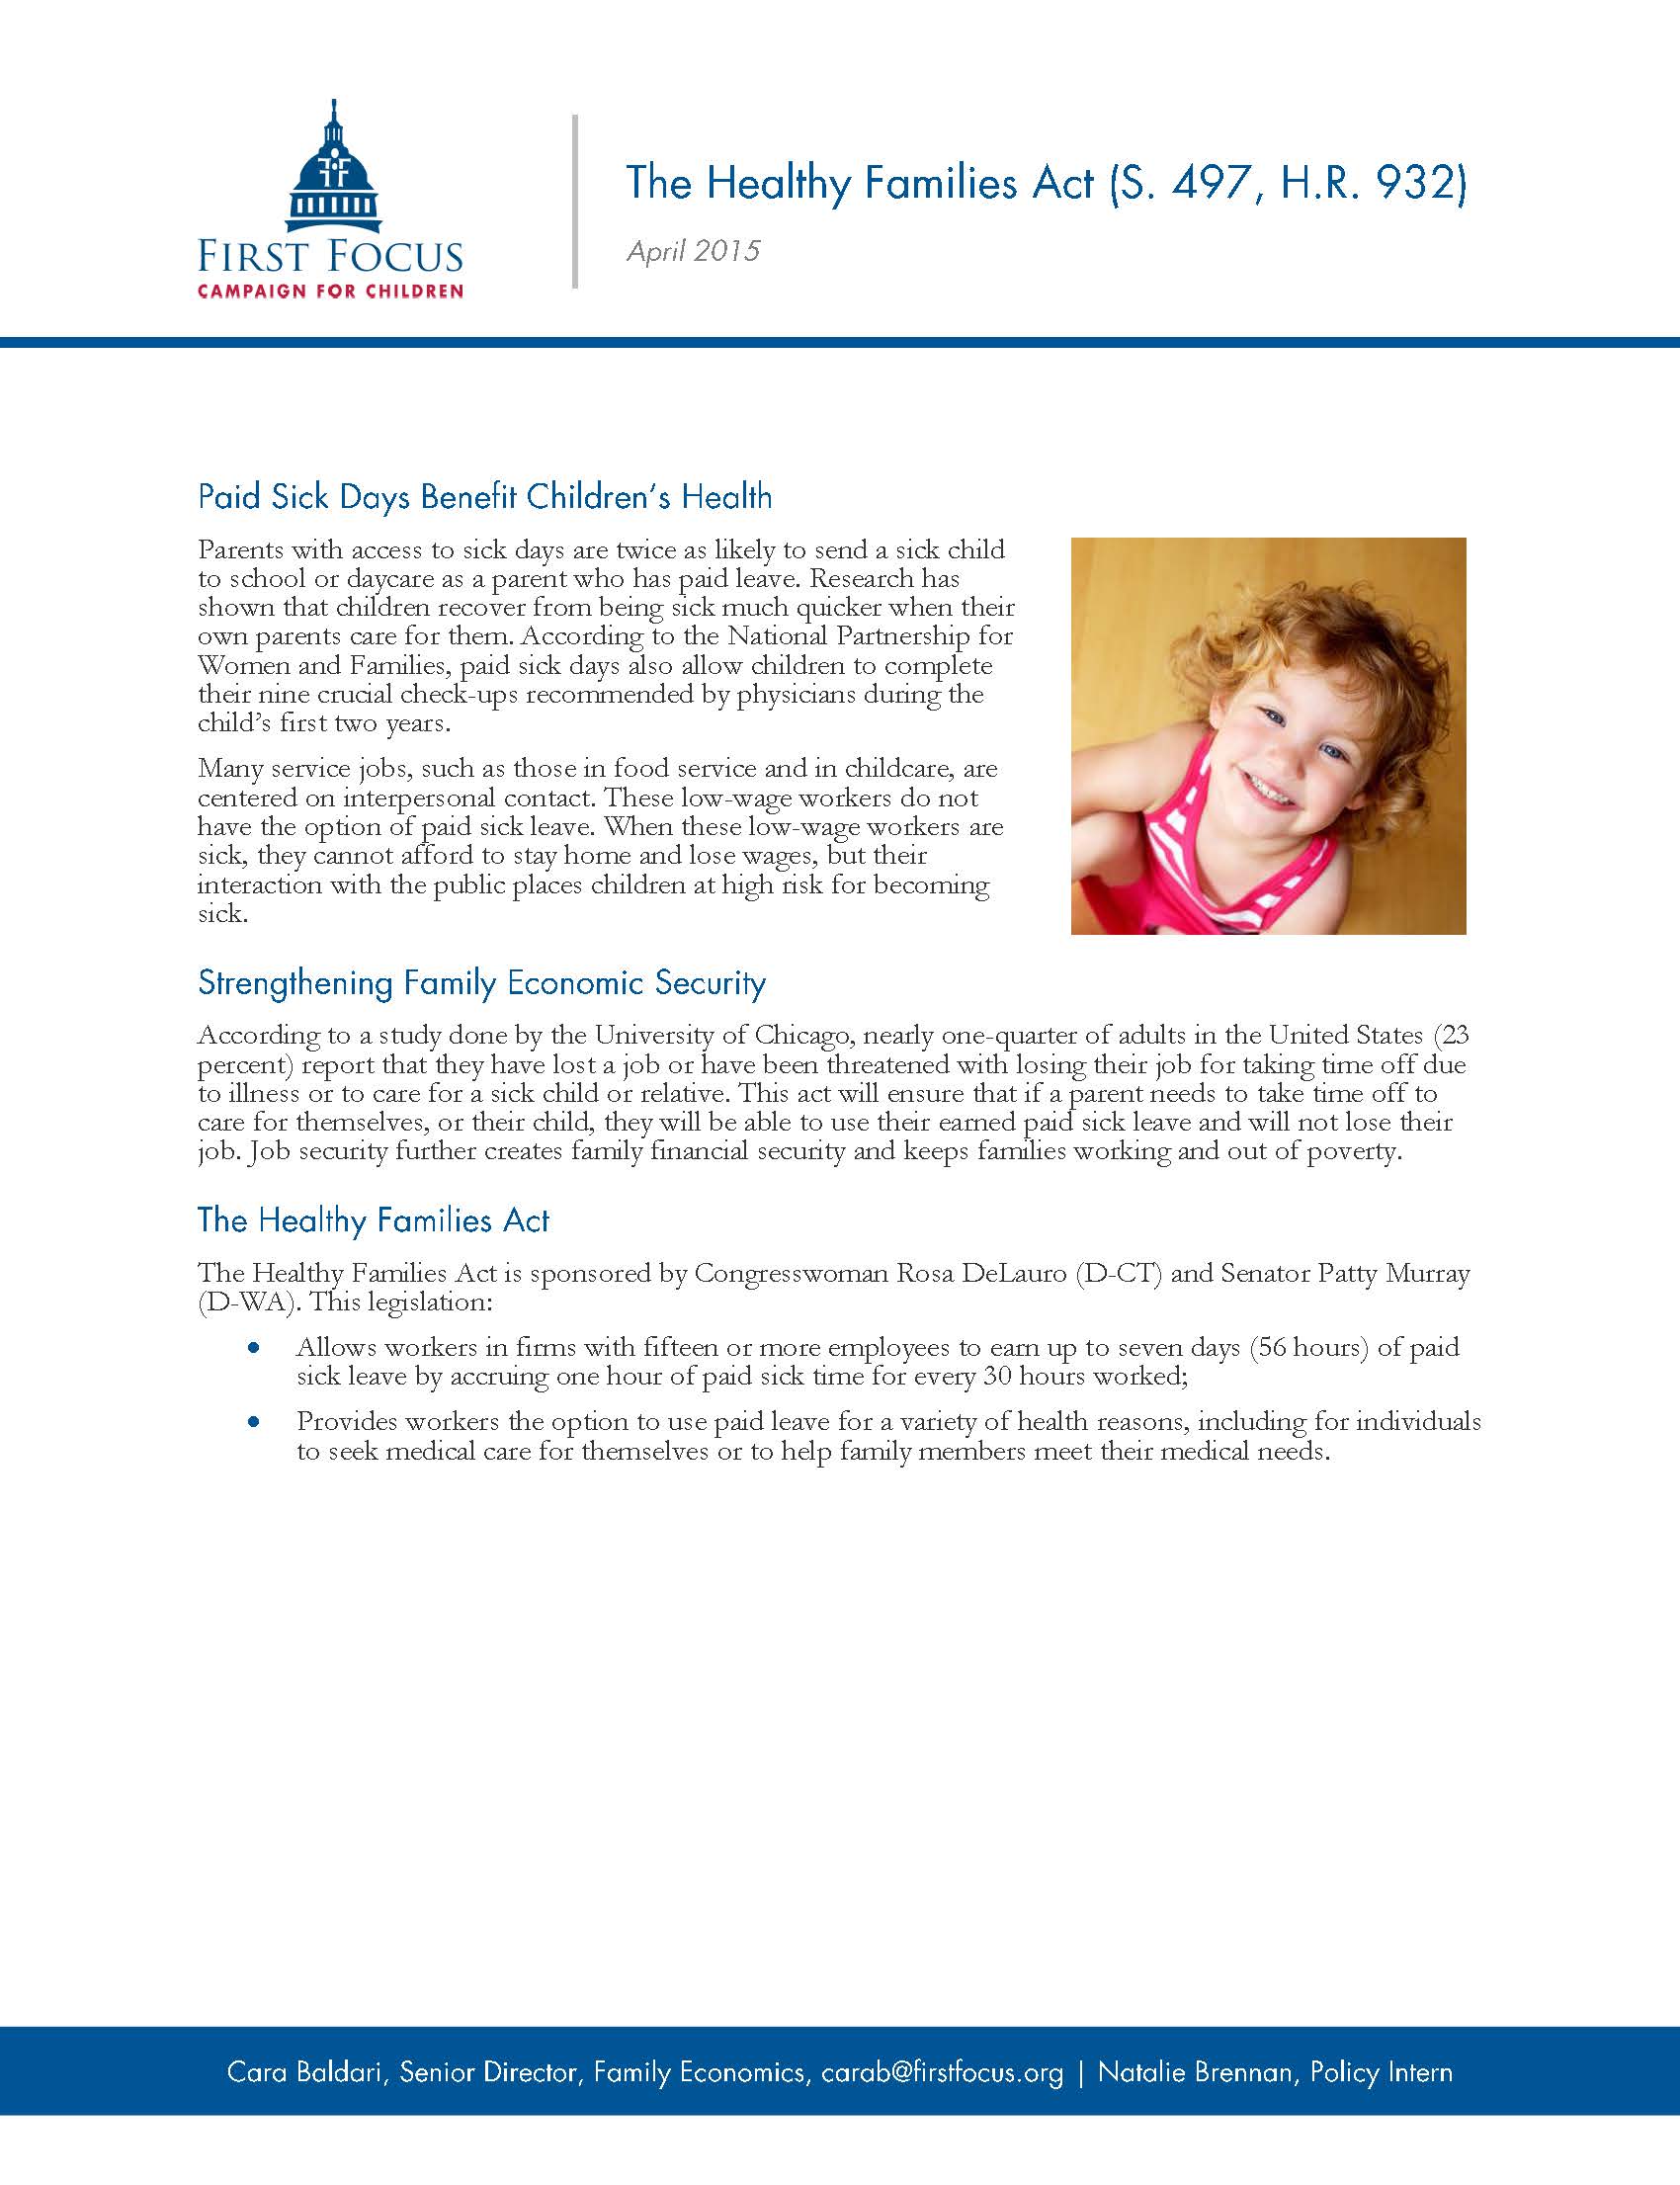 The Healthy Families Act Fact Sheet